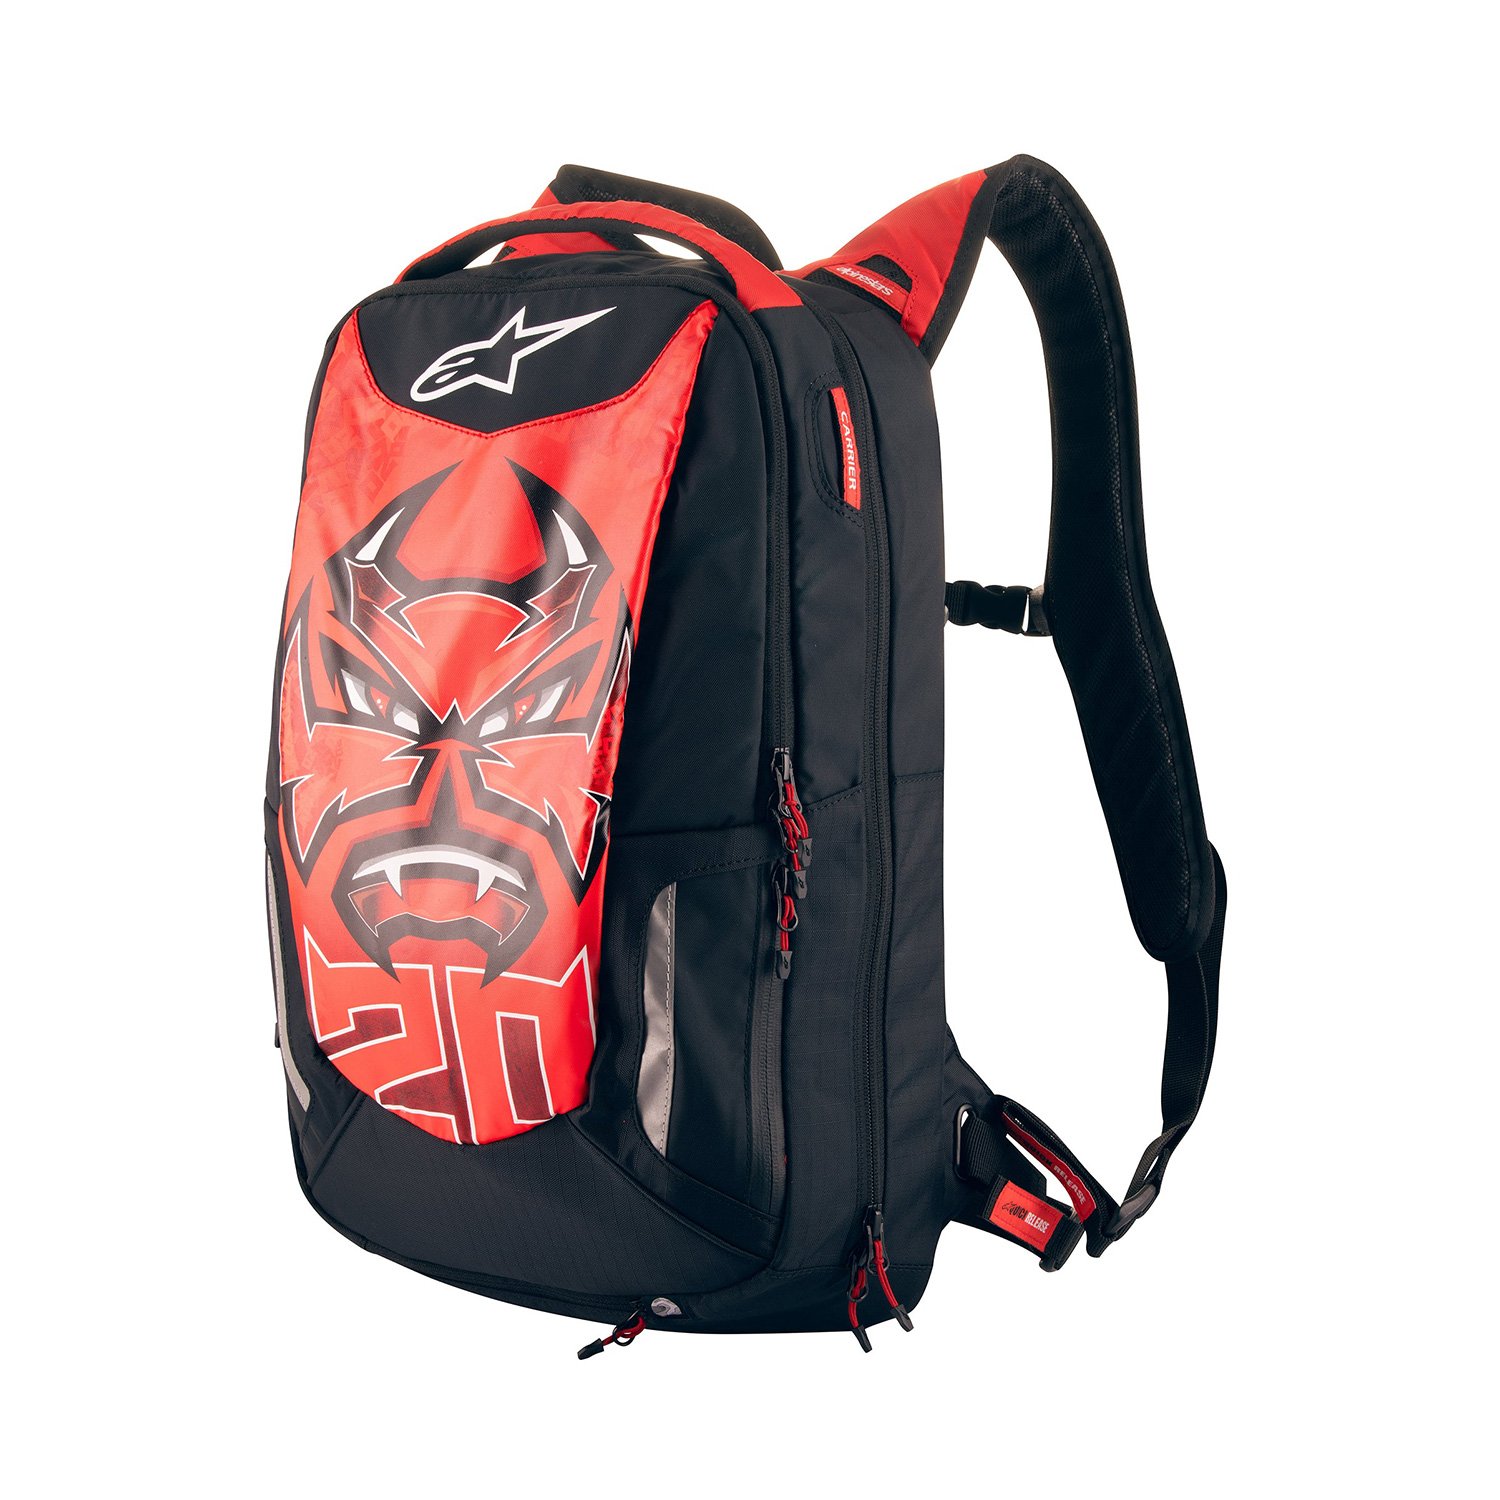 Image of EU Alpinestars FQ20 City Hunter Backpack Black Bright Red White Taille